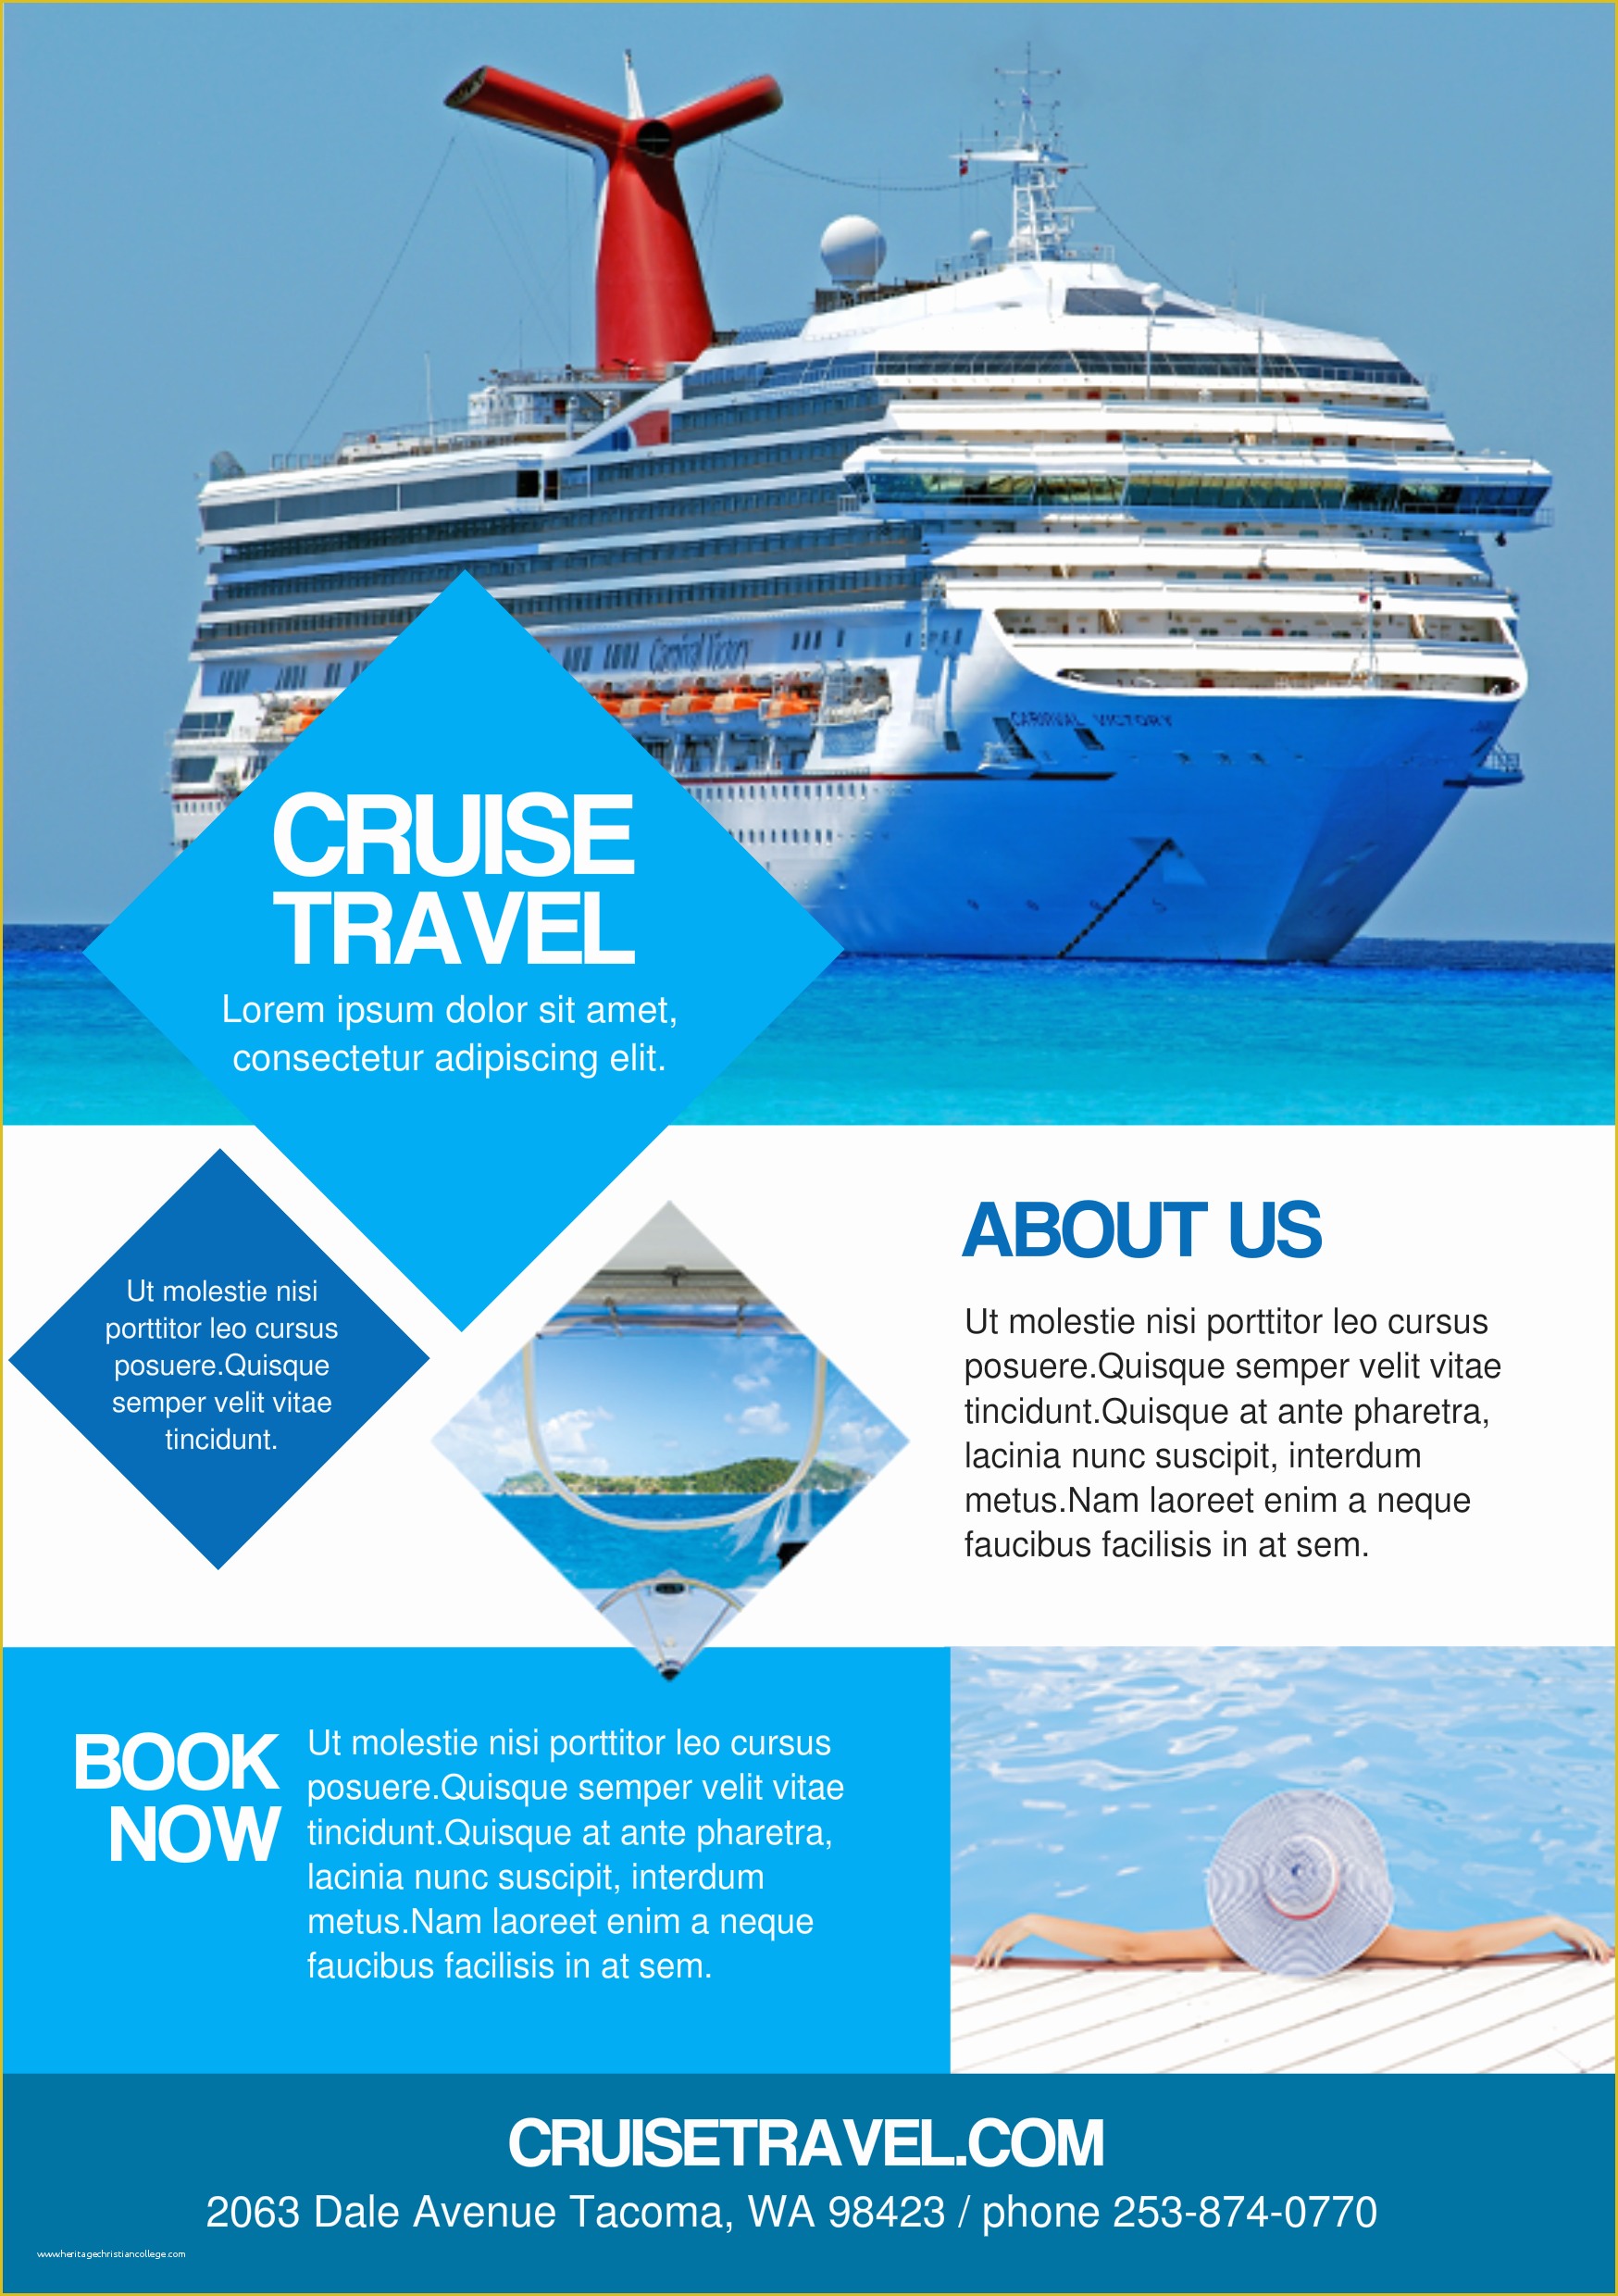 Travel Flyer Template Free Of Cruise Travel A Promotional Flyer Http Premadevideos and